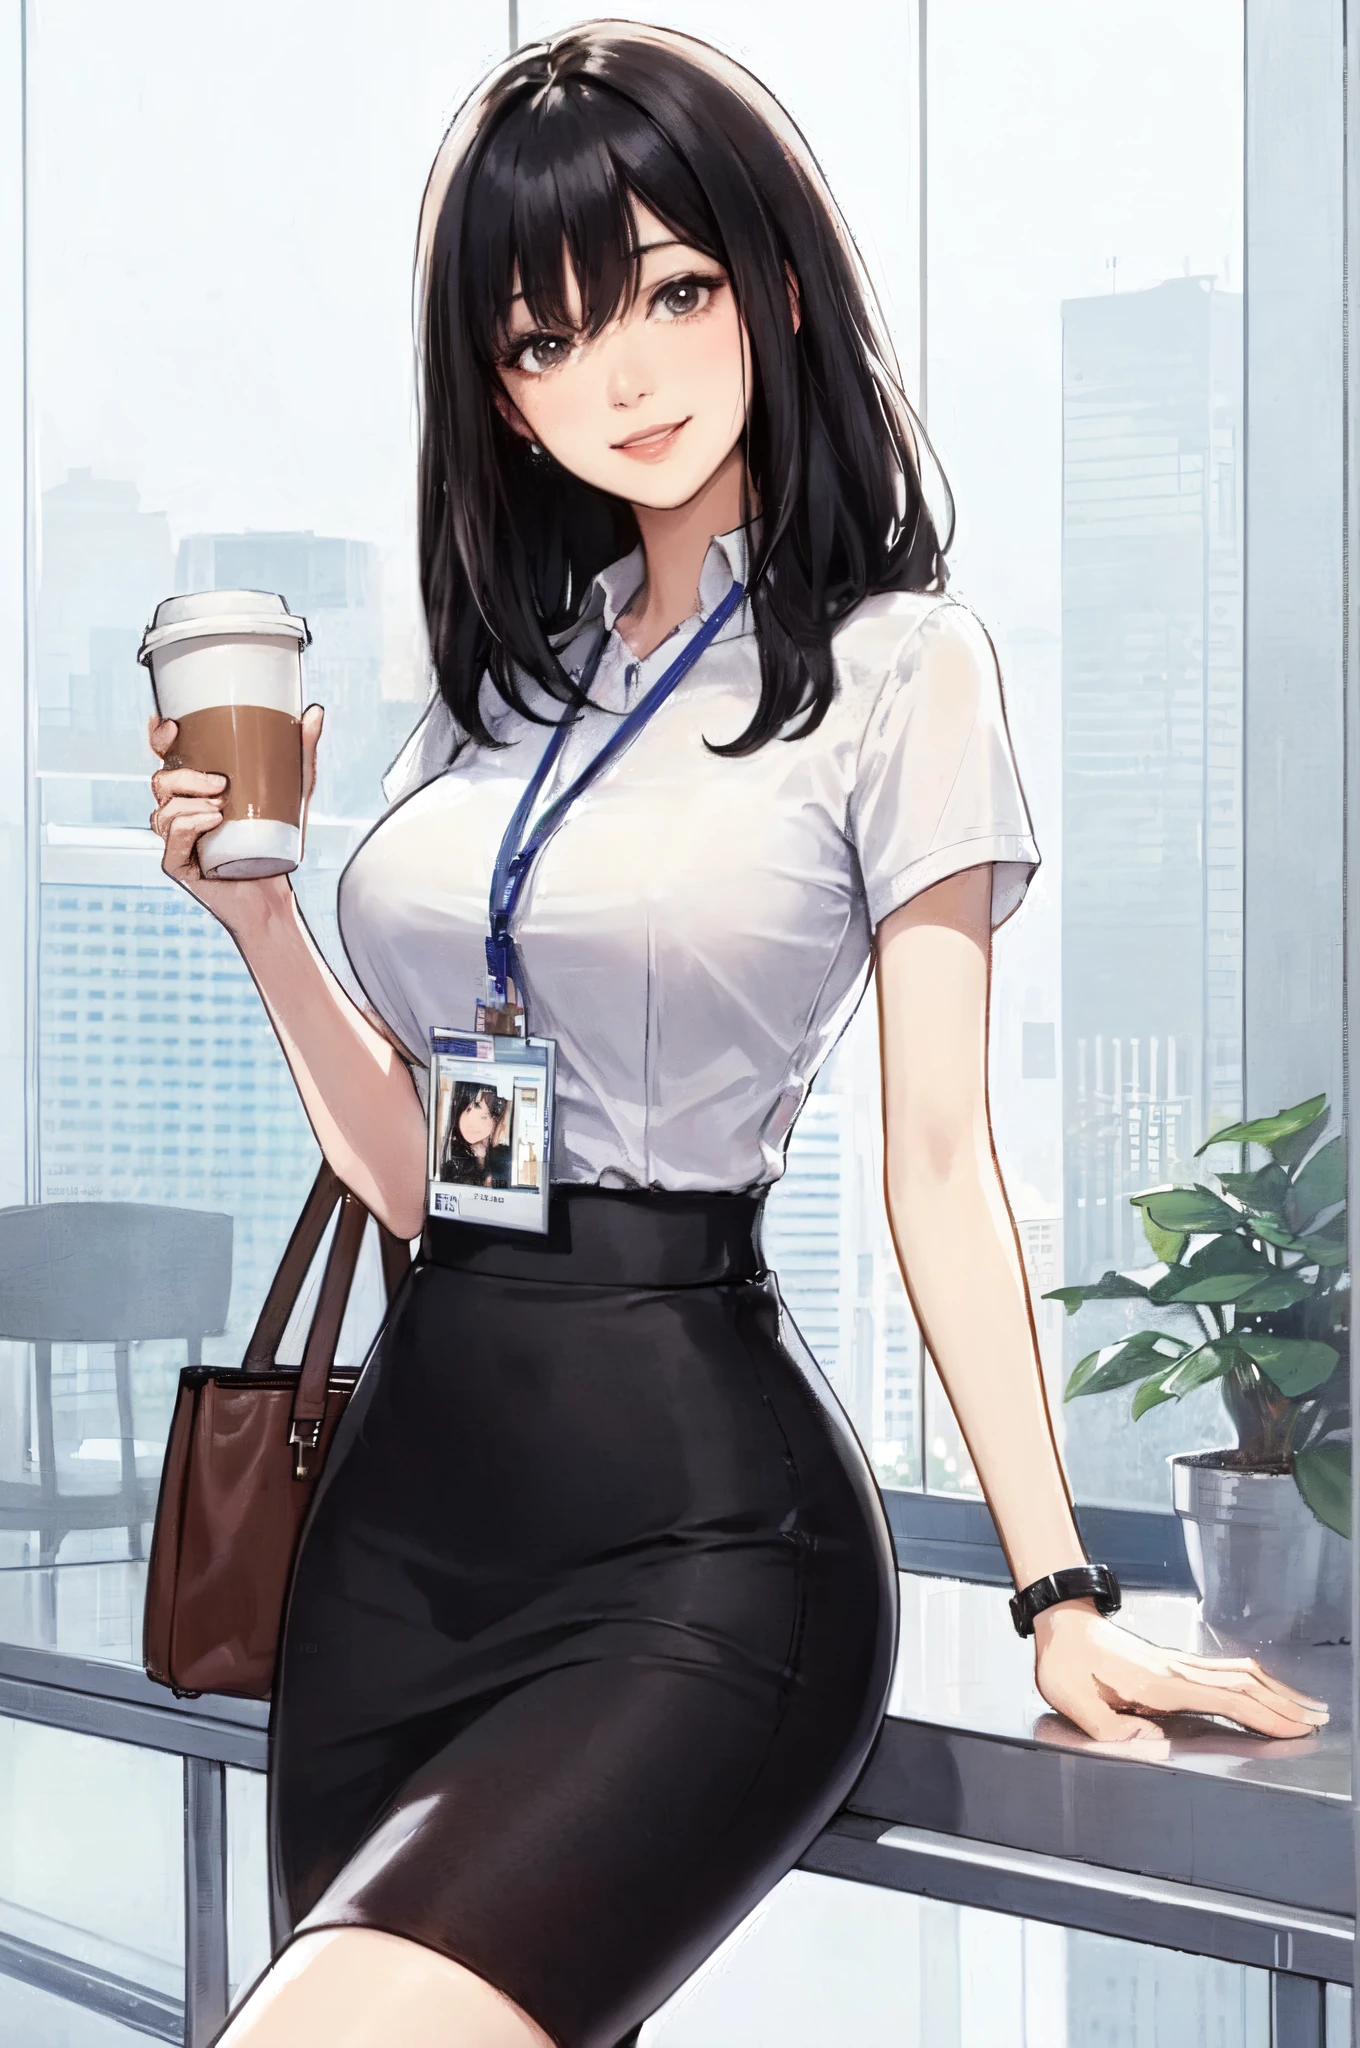 1lady standing, holding a coffee cup, office worker outfit /(id card lanyard/), mature female, /(black hair/) bangs, light smile, (masterpiece best quality:1.2) delicate illustration ultra-detailed BREAK /(modern office indoors/), window skyscraper